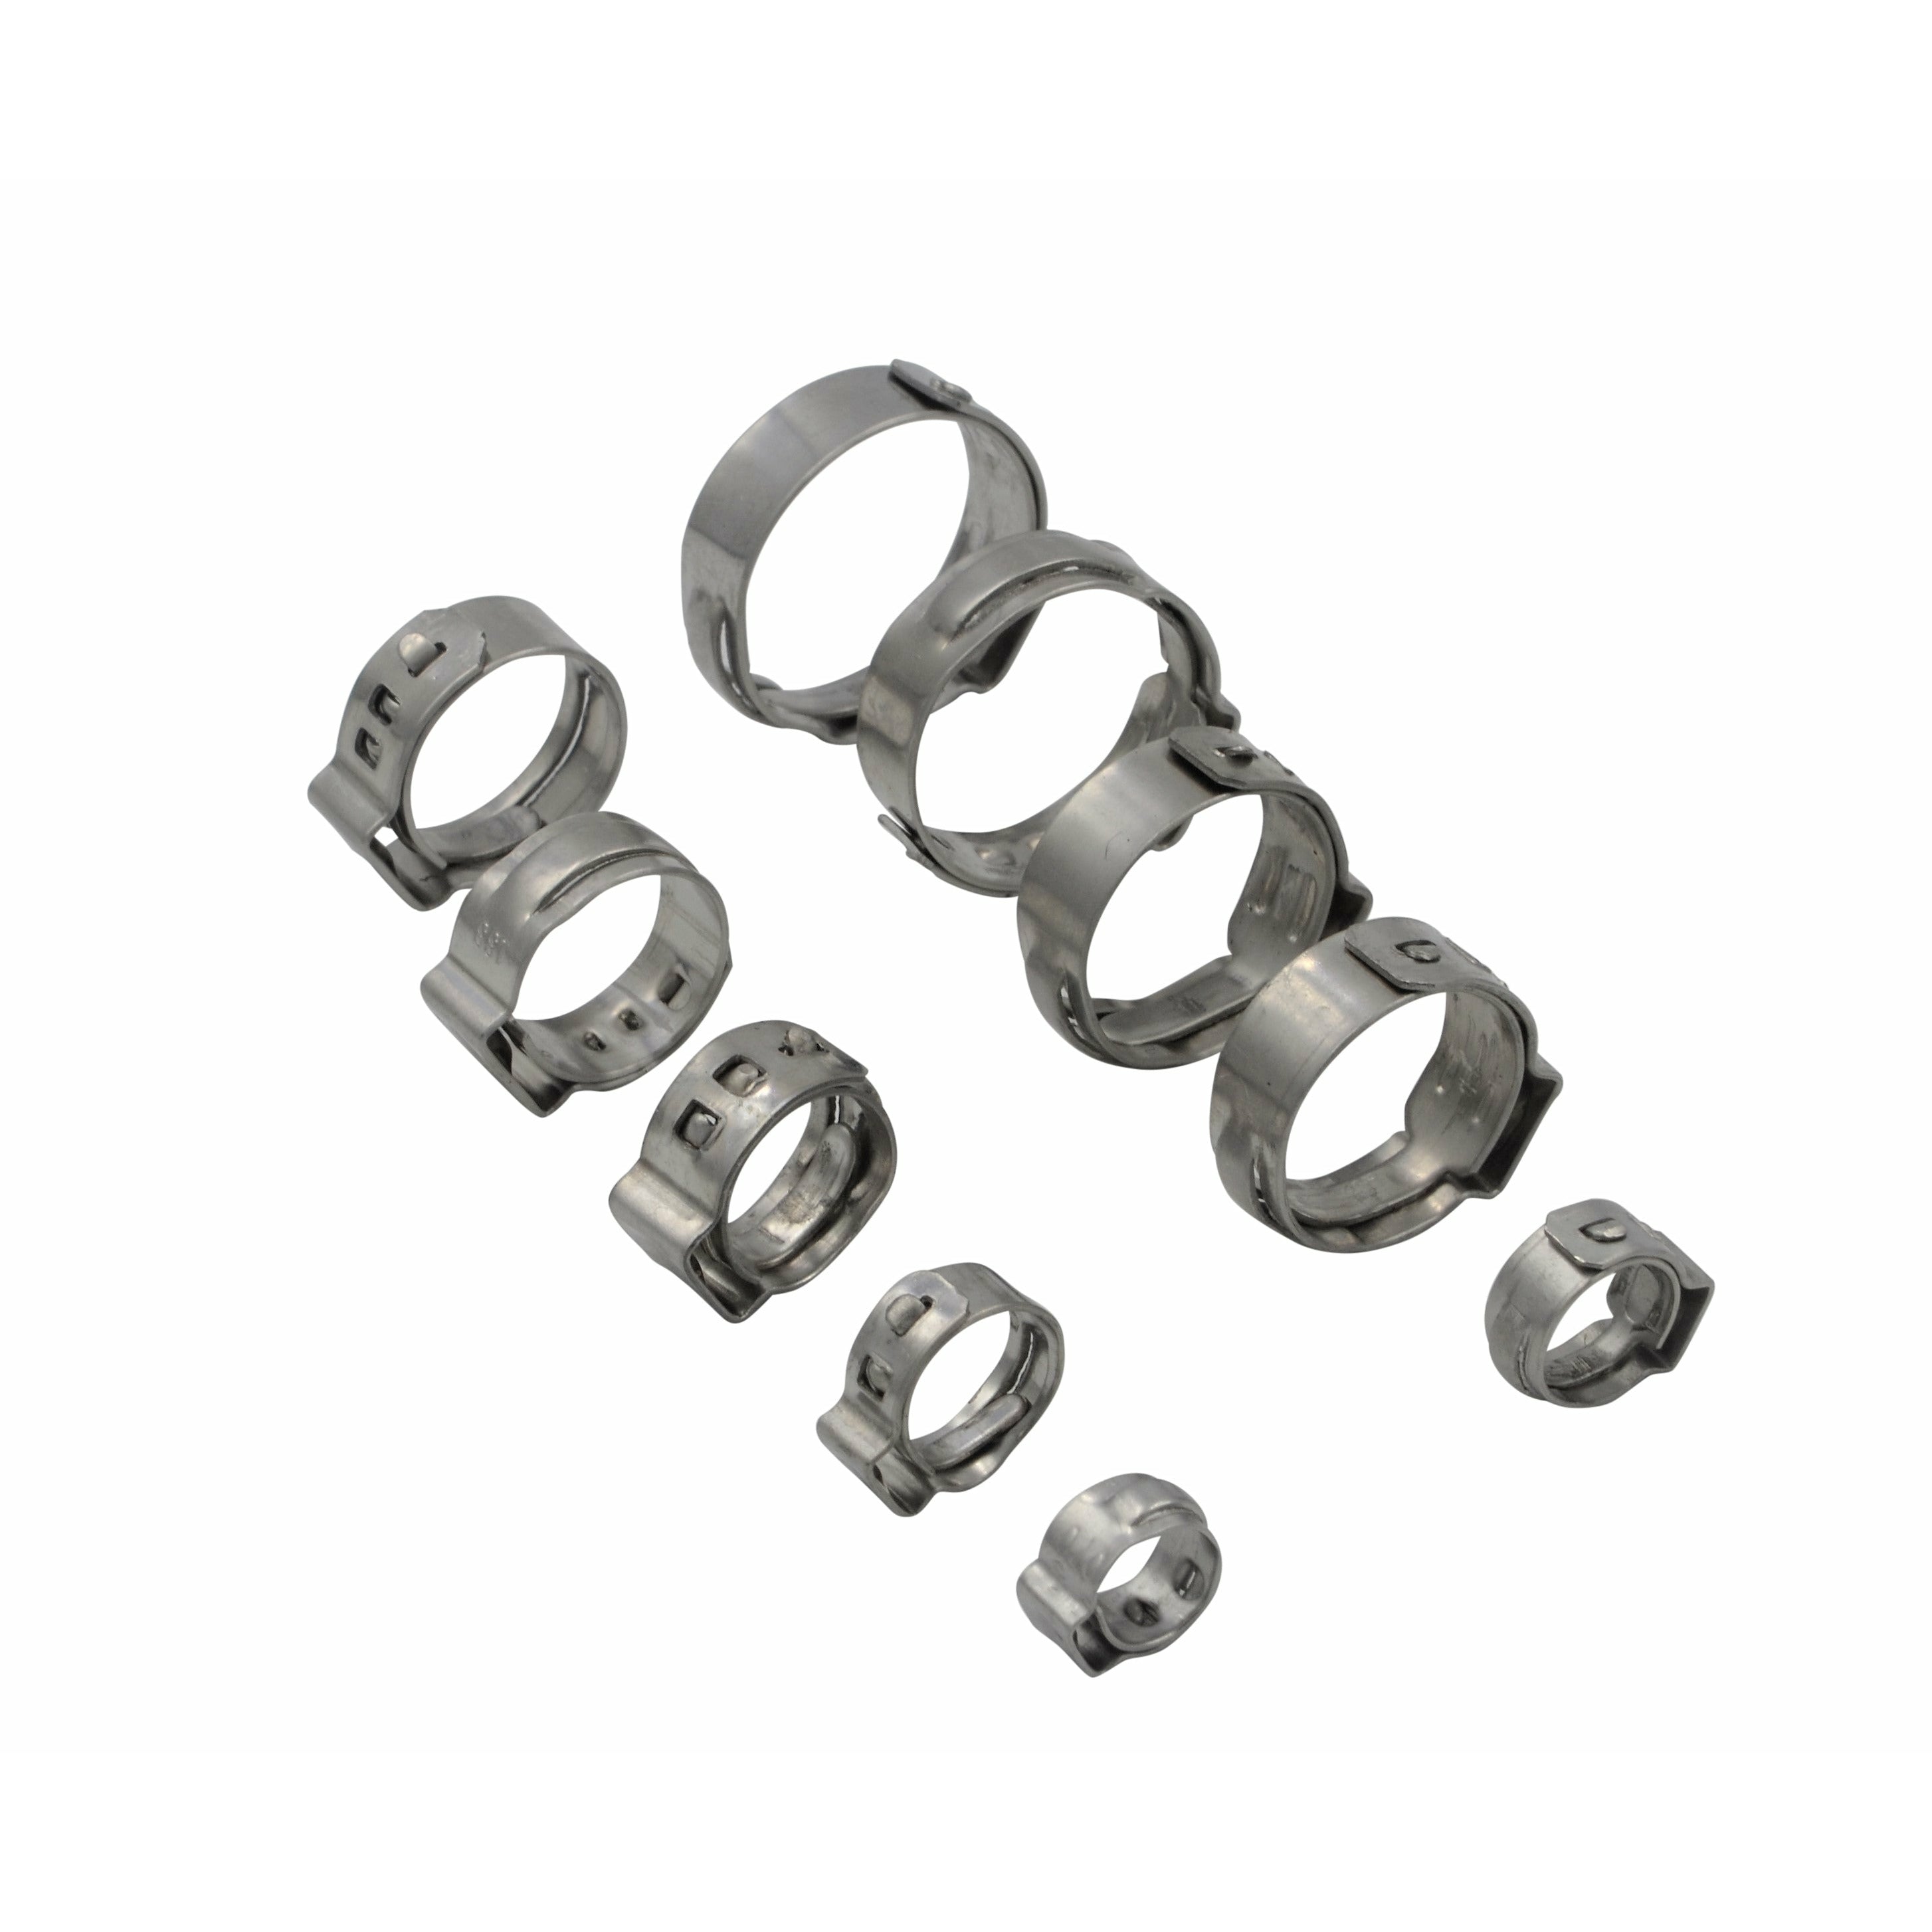 100 Piece 304 Stainless Steel 17.8-21mm Ear Hose Clamp Grab Kit Assortment